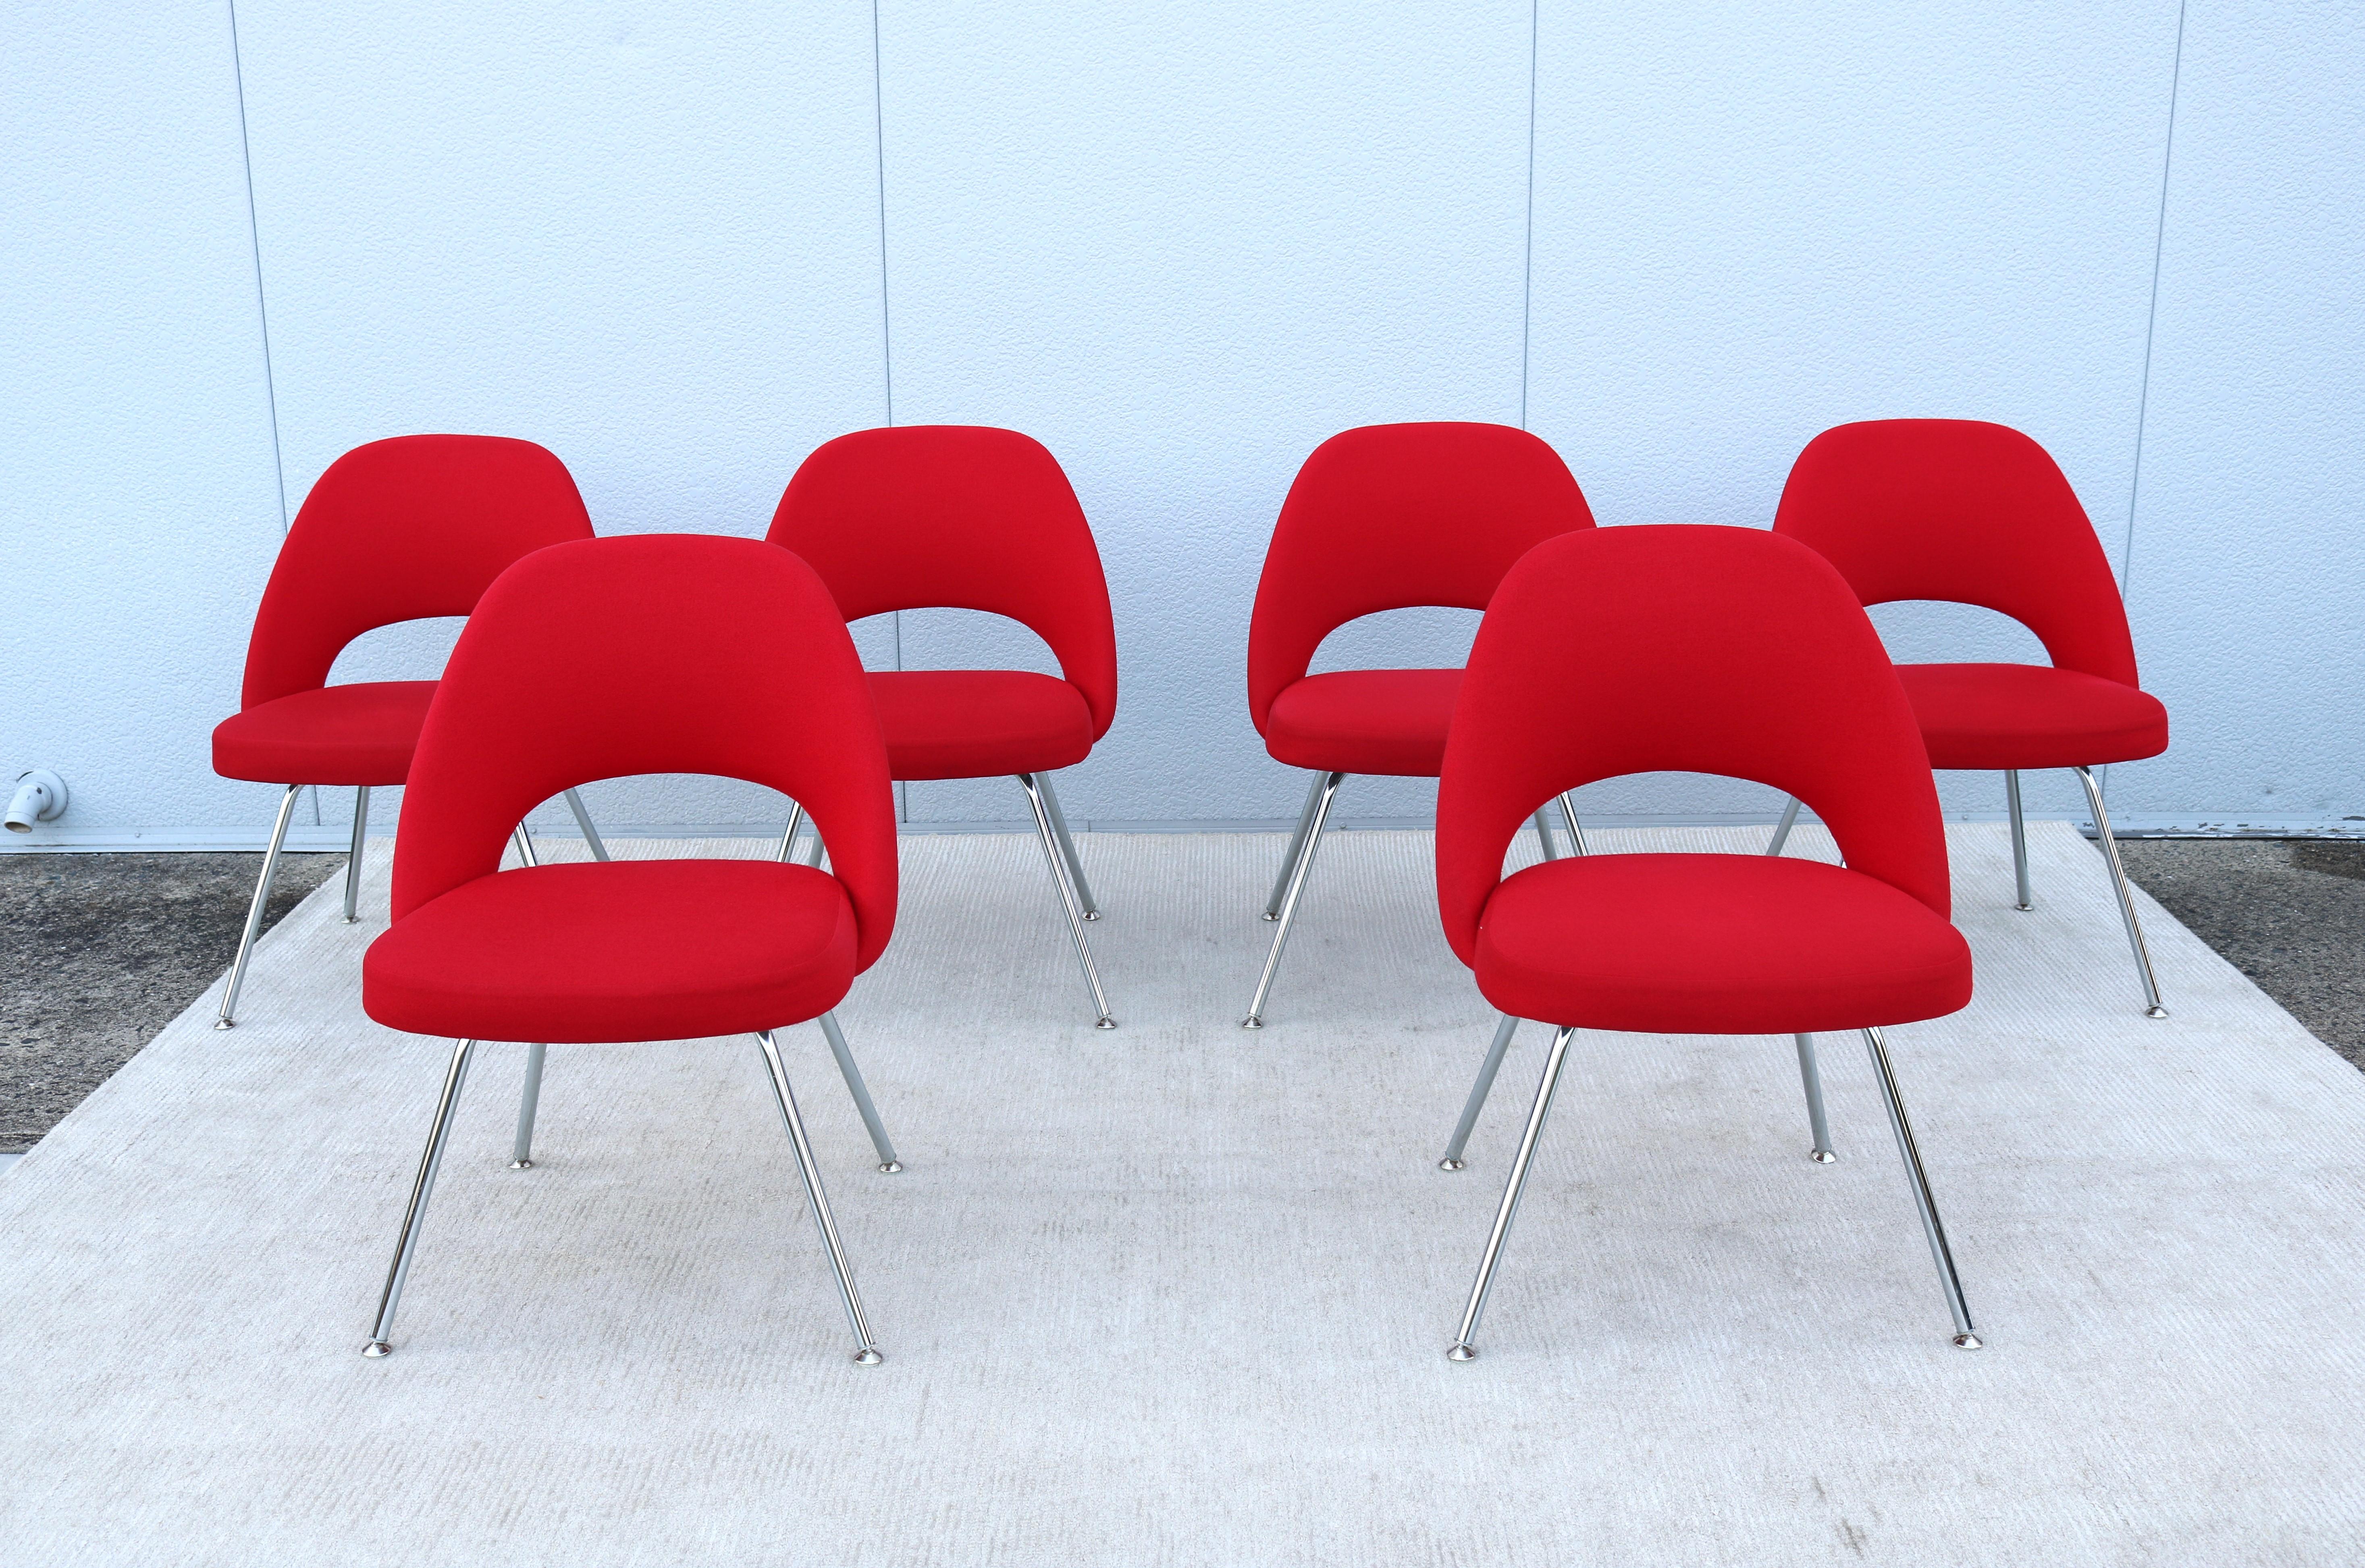 Stunning authentic mid-century modern set of six Saarinen executive armless chairs by Knoll.
One of Knoll's most popular designs that achieved supreme comfort through the shape of its shell.
It was introduced in 1950 a midcentury modern classic of